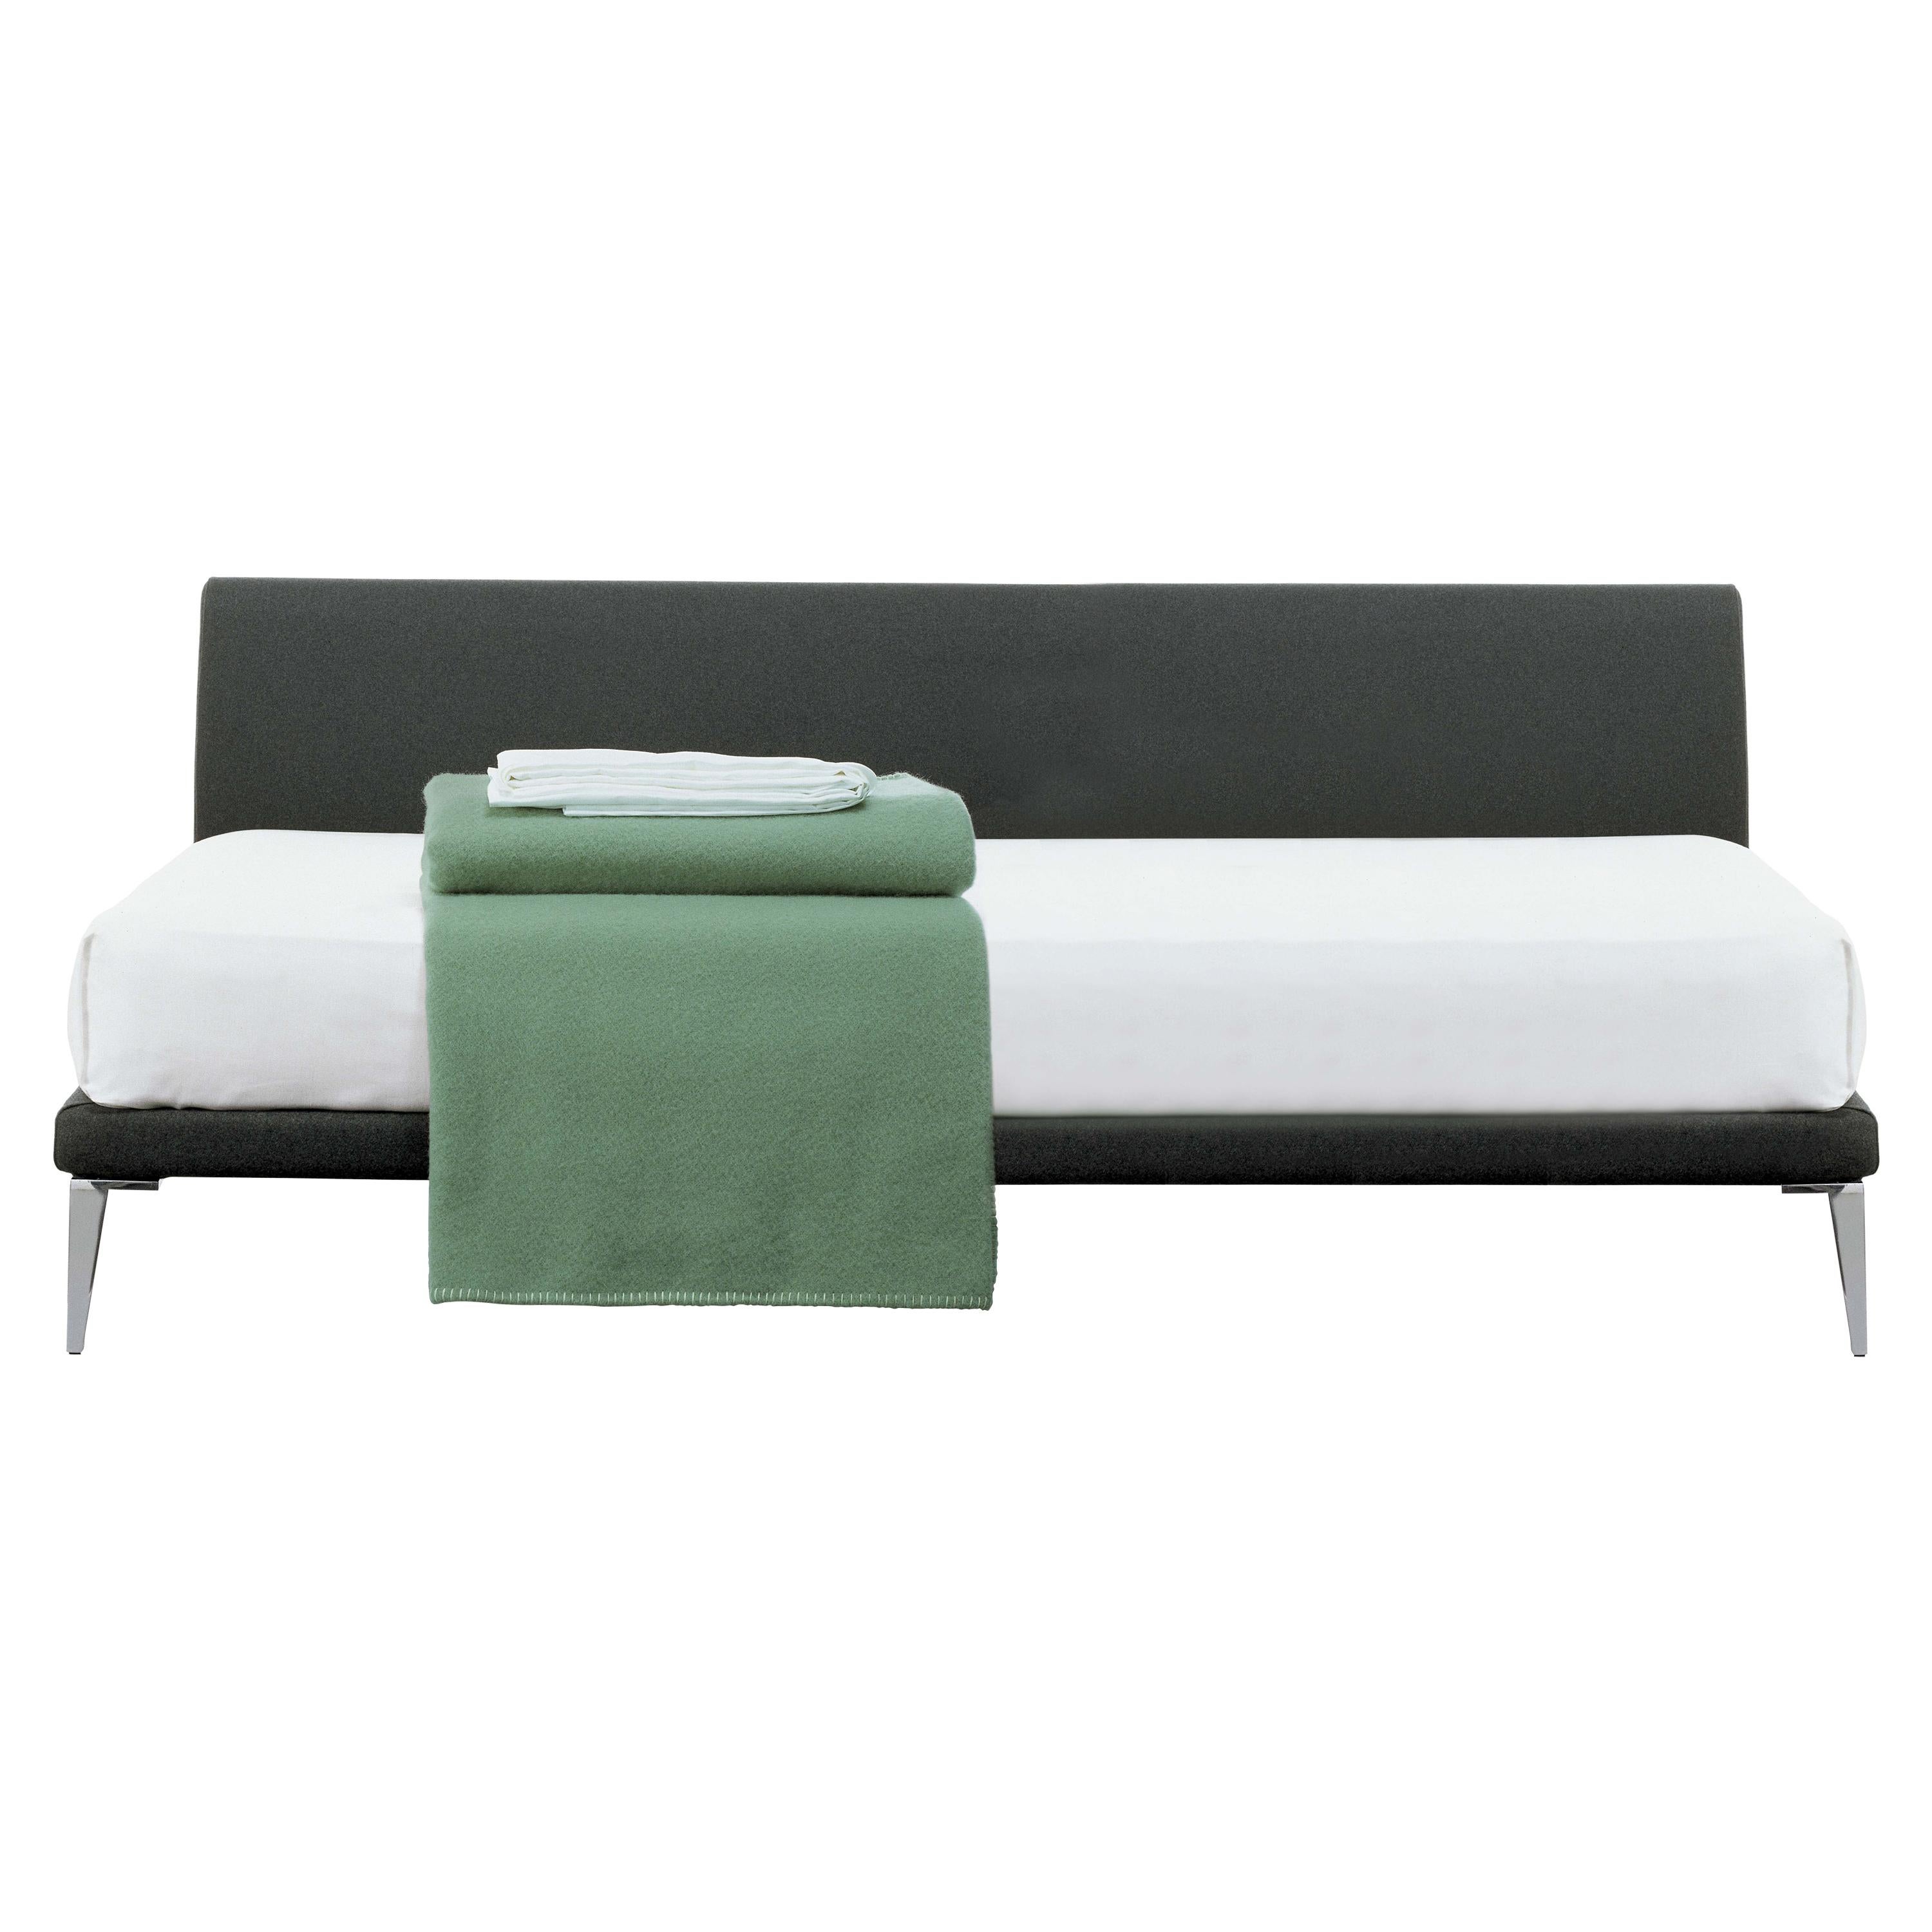 Jasper Morrison Bed in Fir and Poplar Plywood and Metal Frame for Cappellini